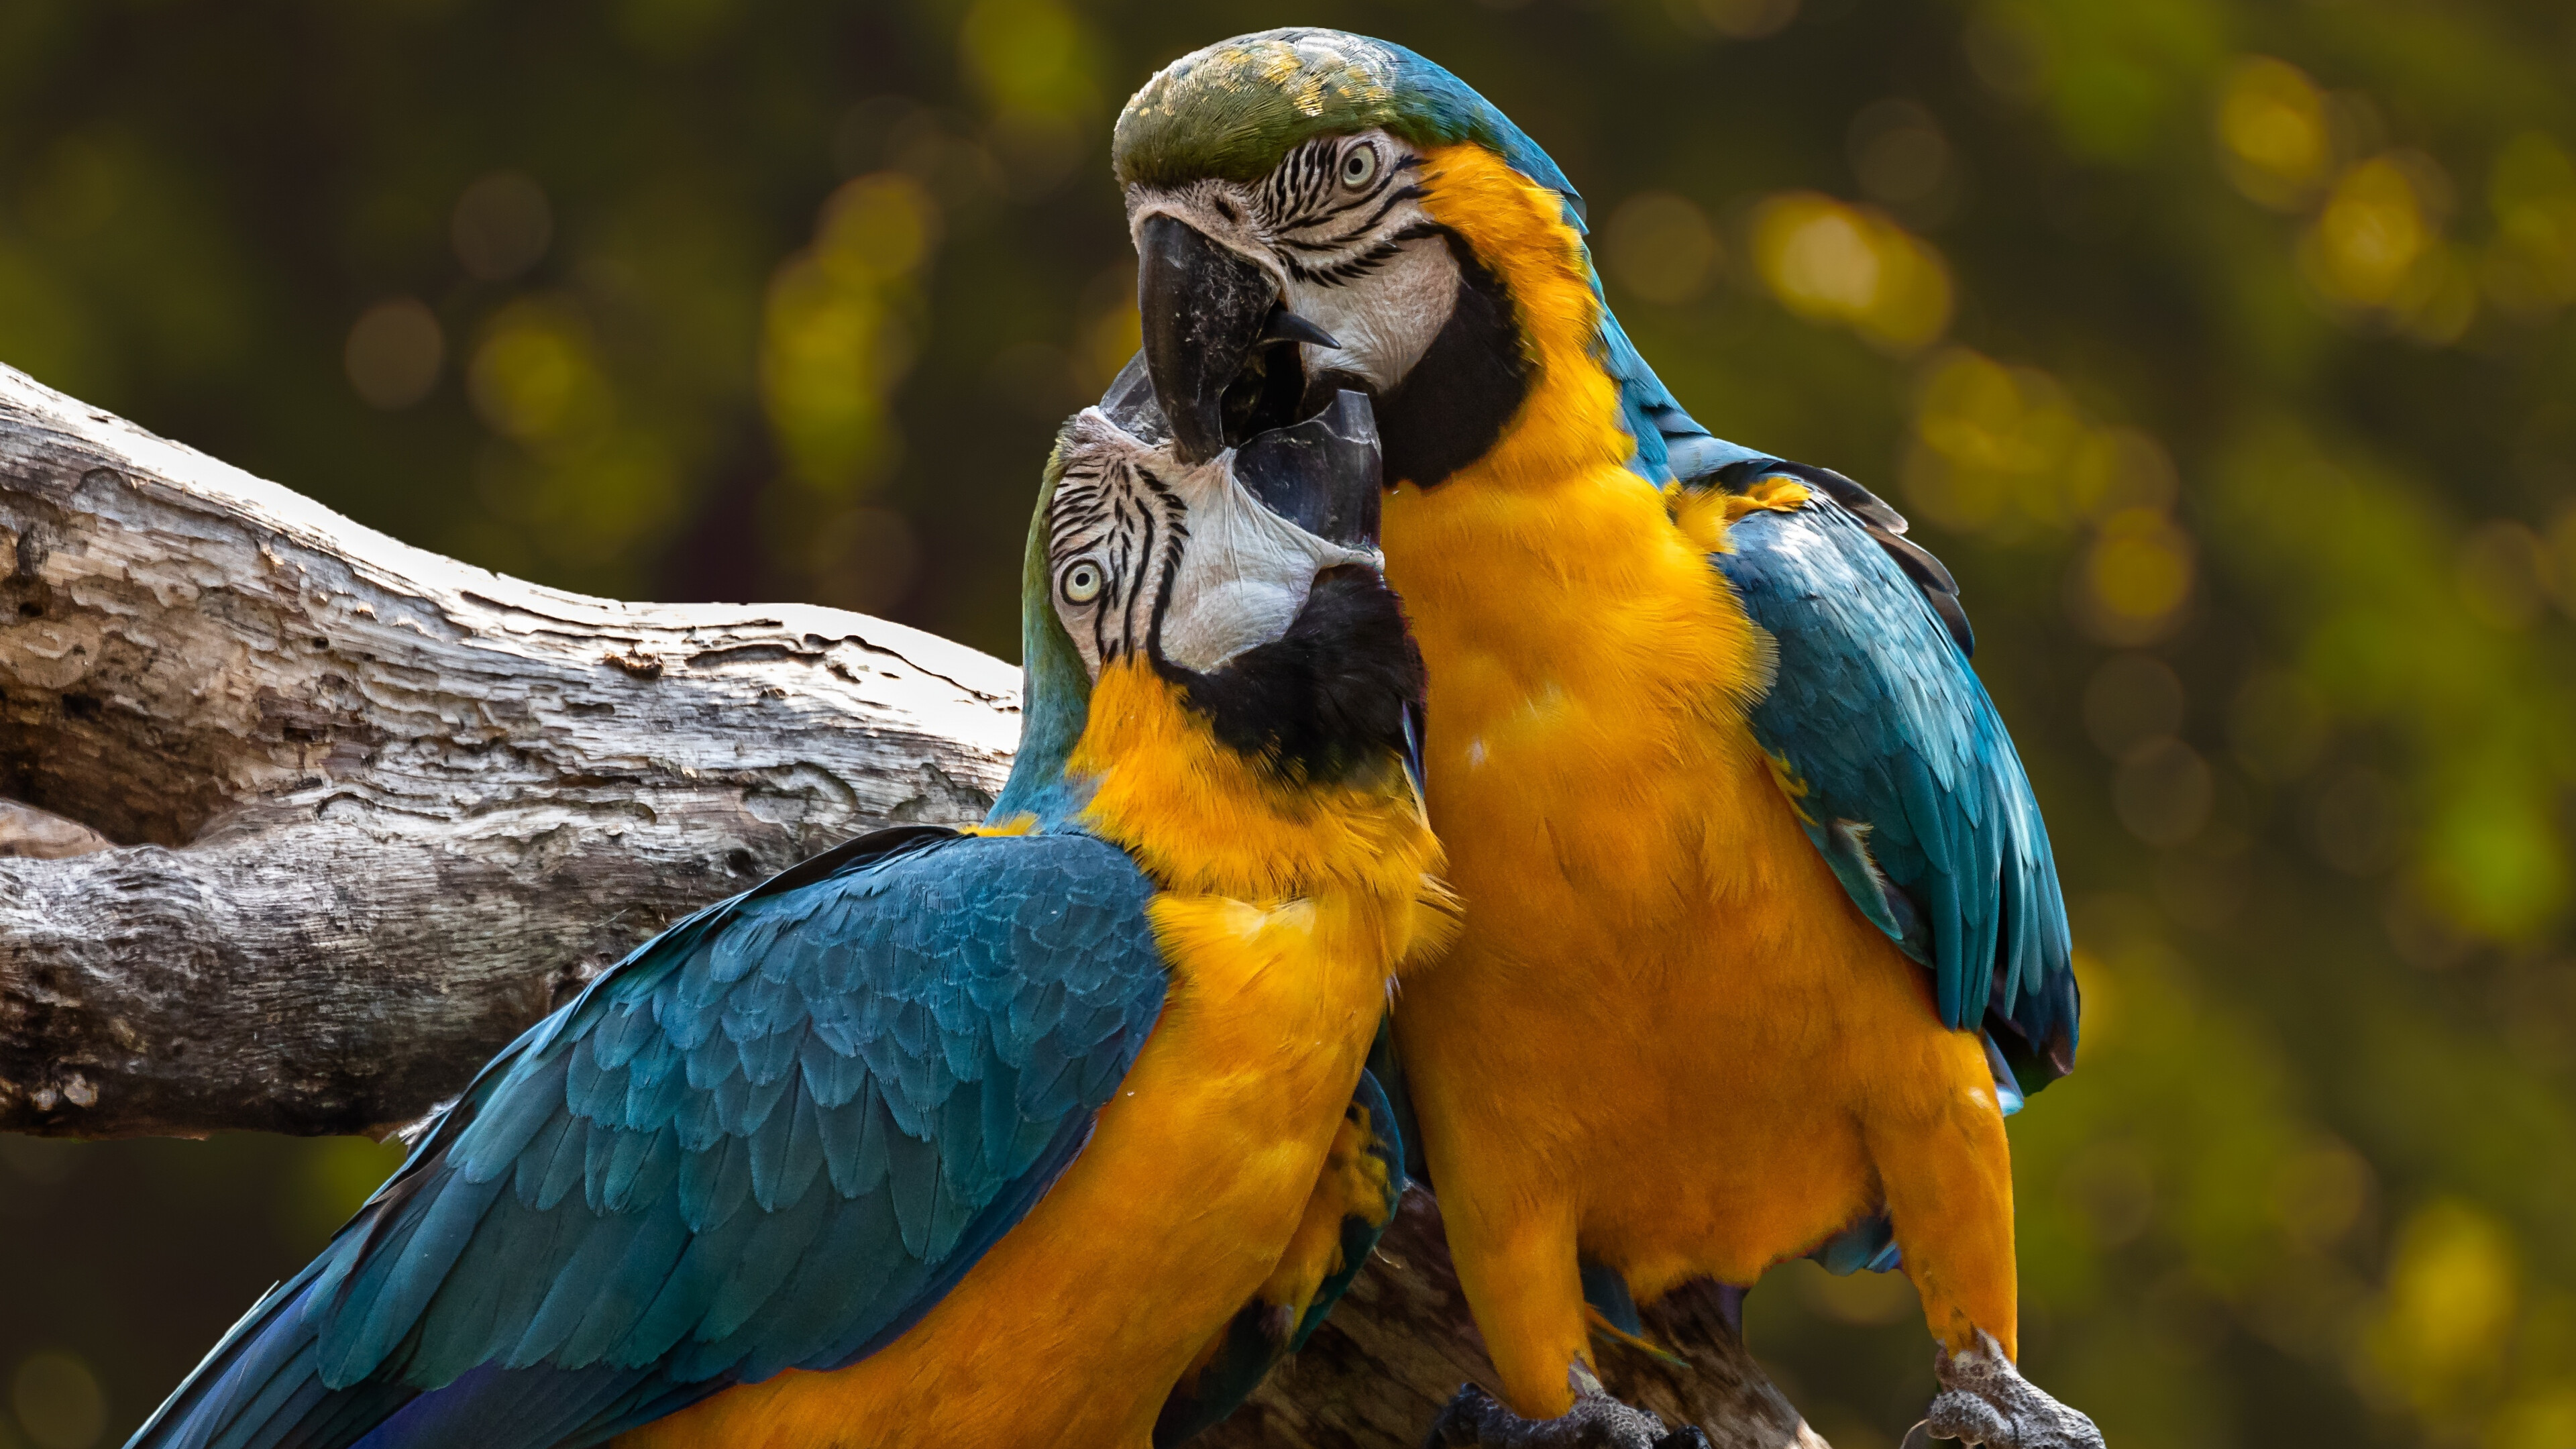 Parrot: Zoo, Macaw, Form the most variably sized bird order in terms of length. 3840x2160 4K Wallpaper.